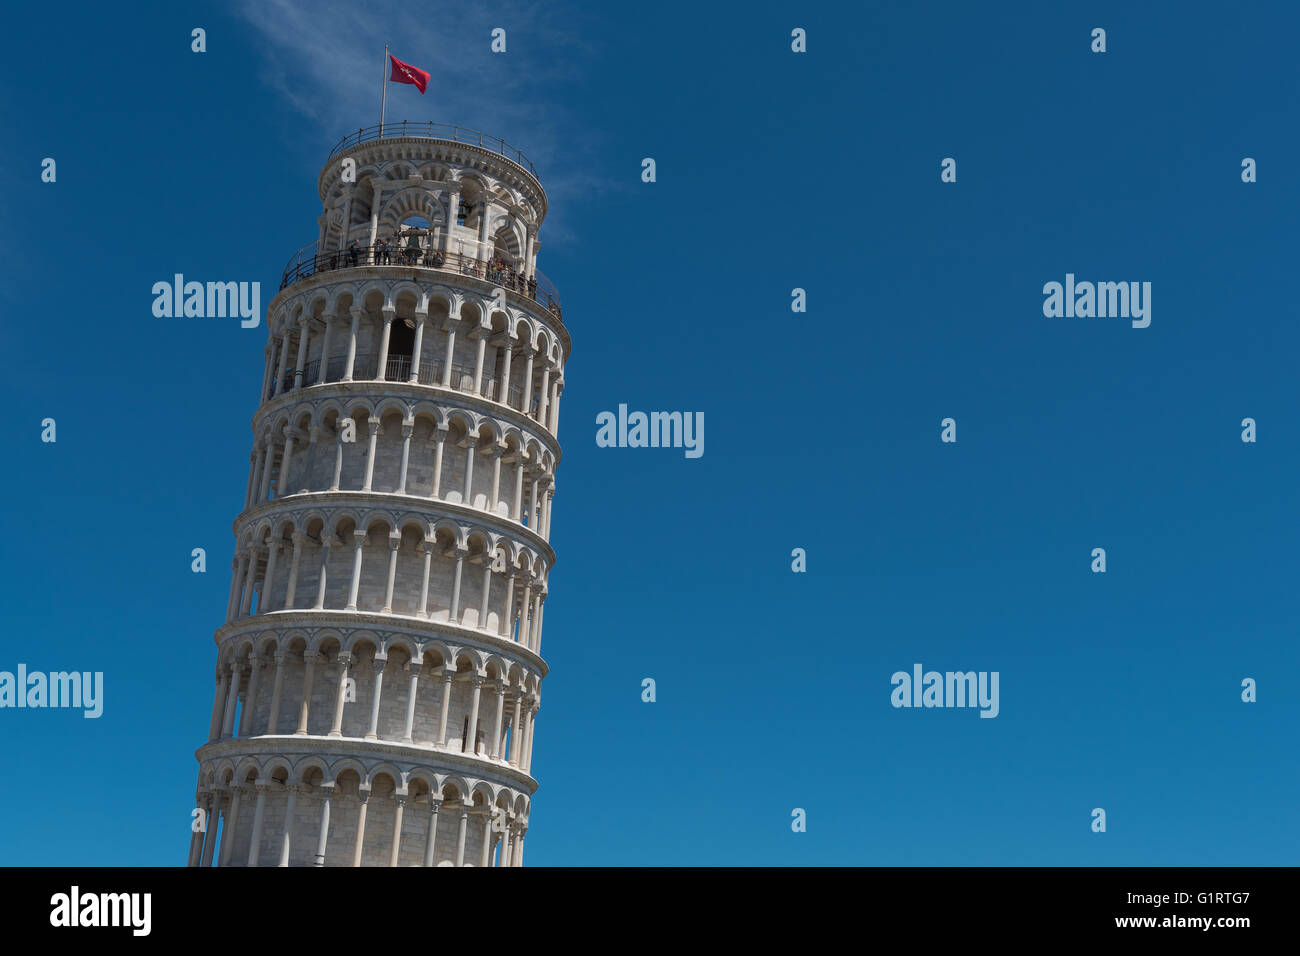 Leaning Tower of Pisa, Piazza del Duomo, Piazza dei Miracoli, Province of Pisa, Tuscany, Italy Stock Photo